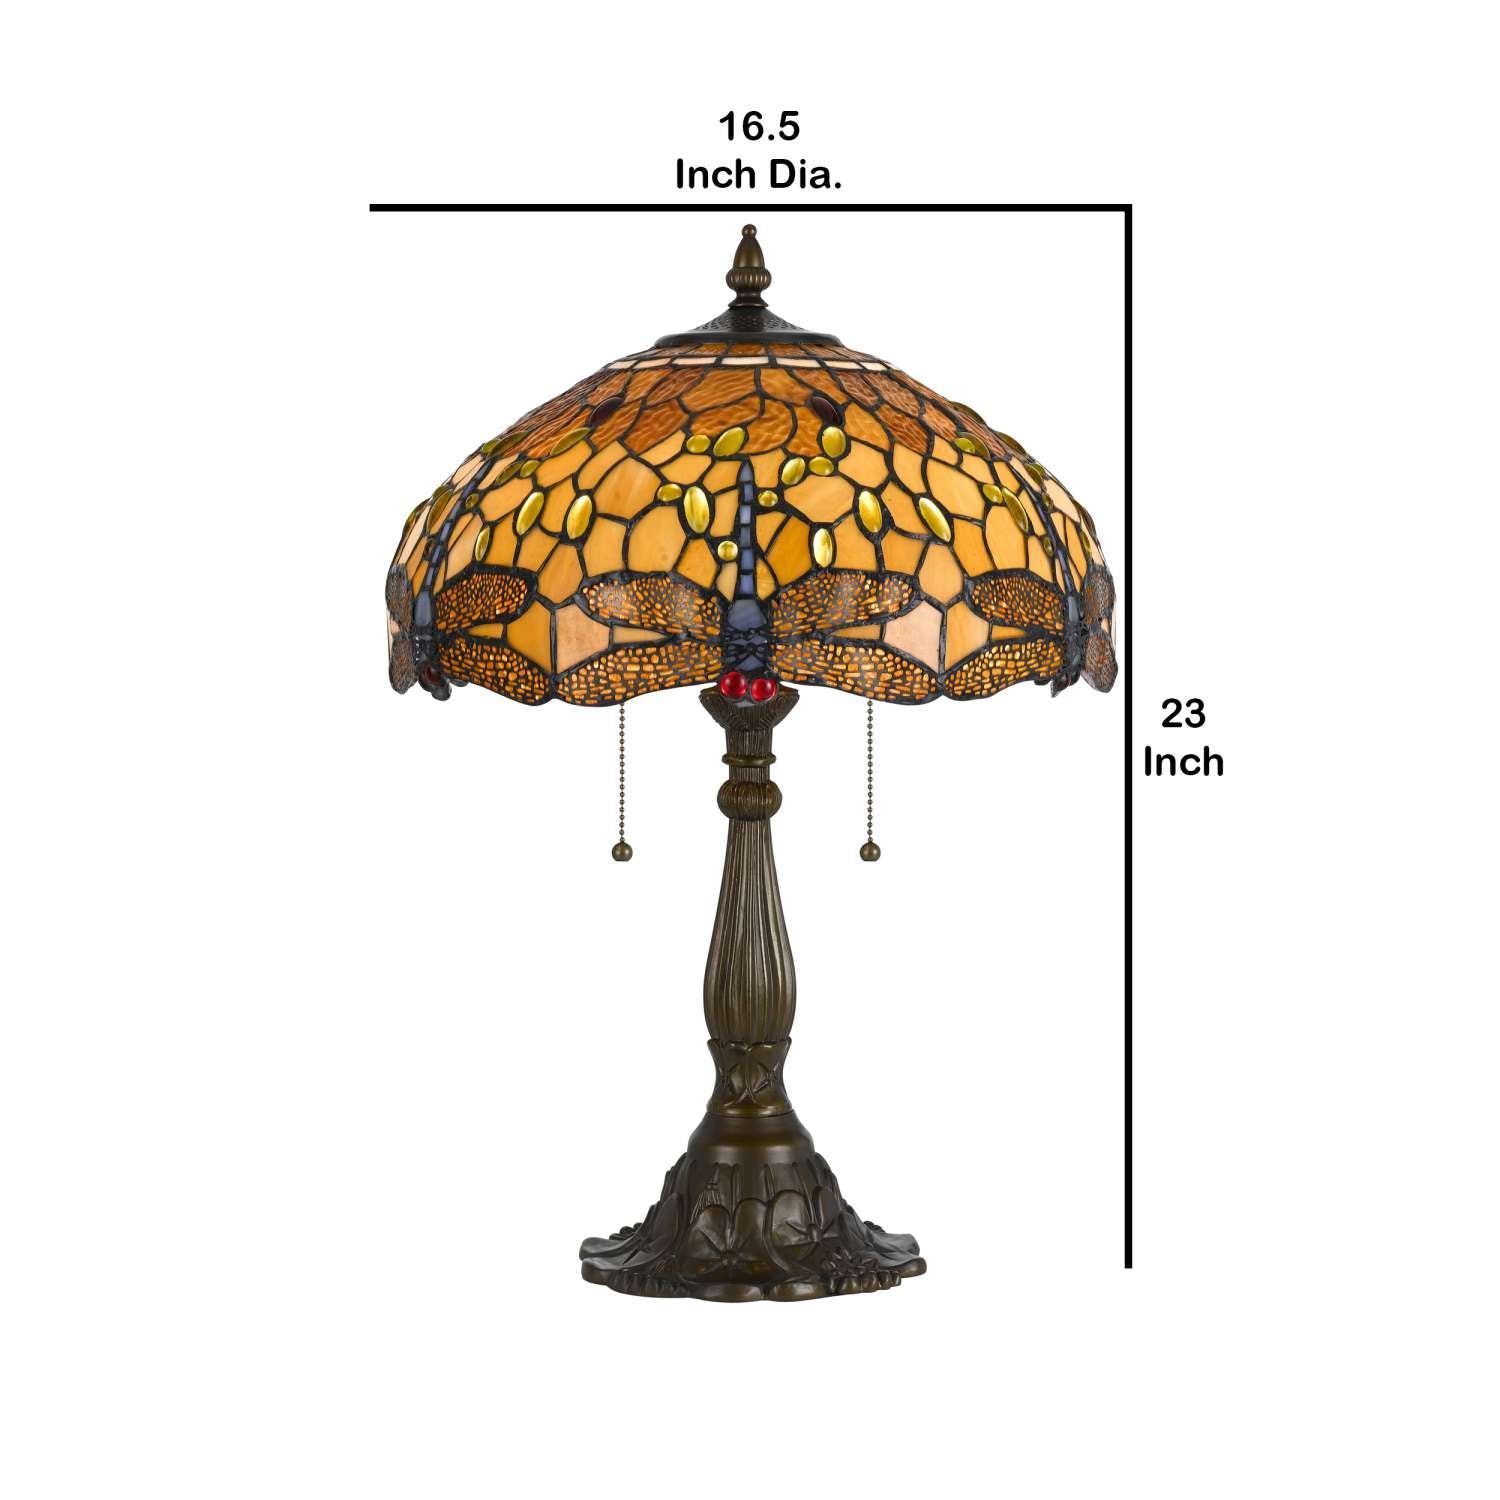 2 Bulb Tiffany Table Lamp With Dragonfly Design Shade, Multicolor By Benzara